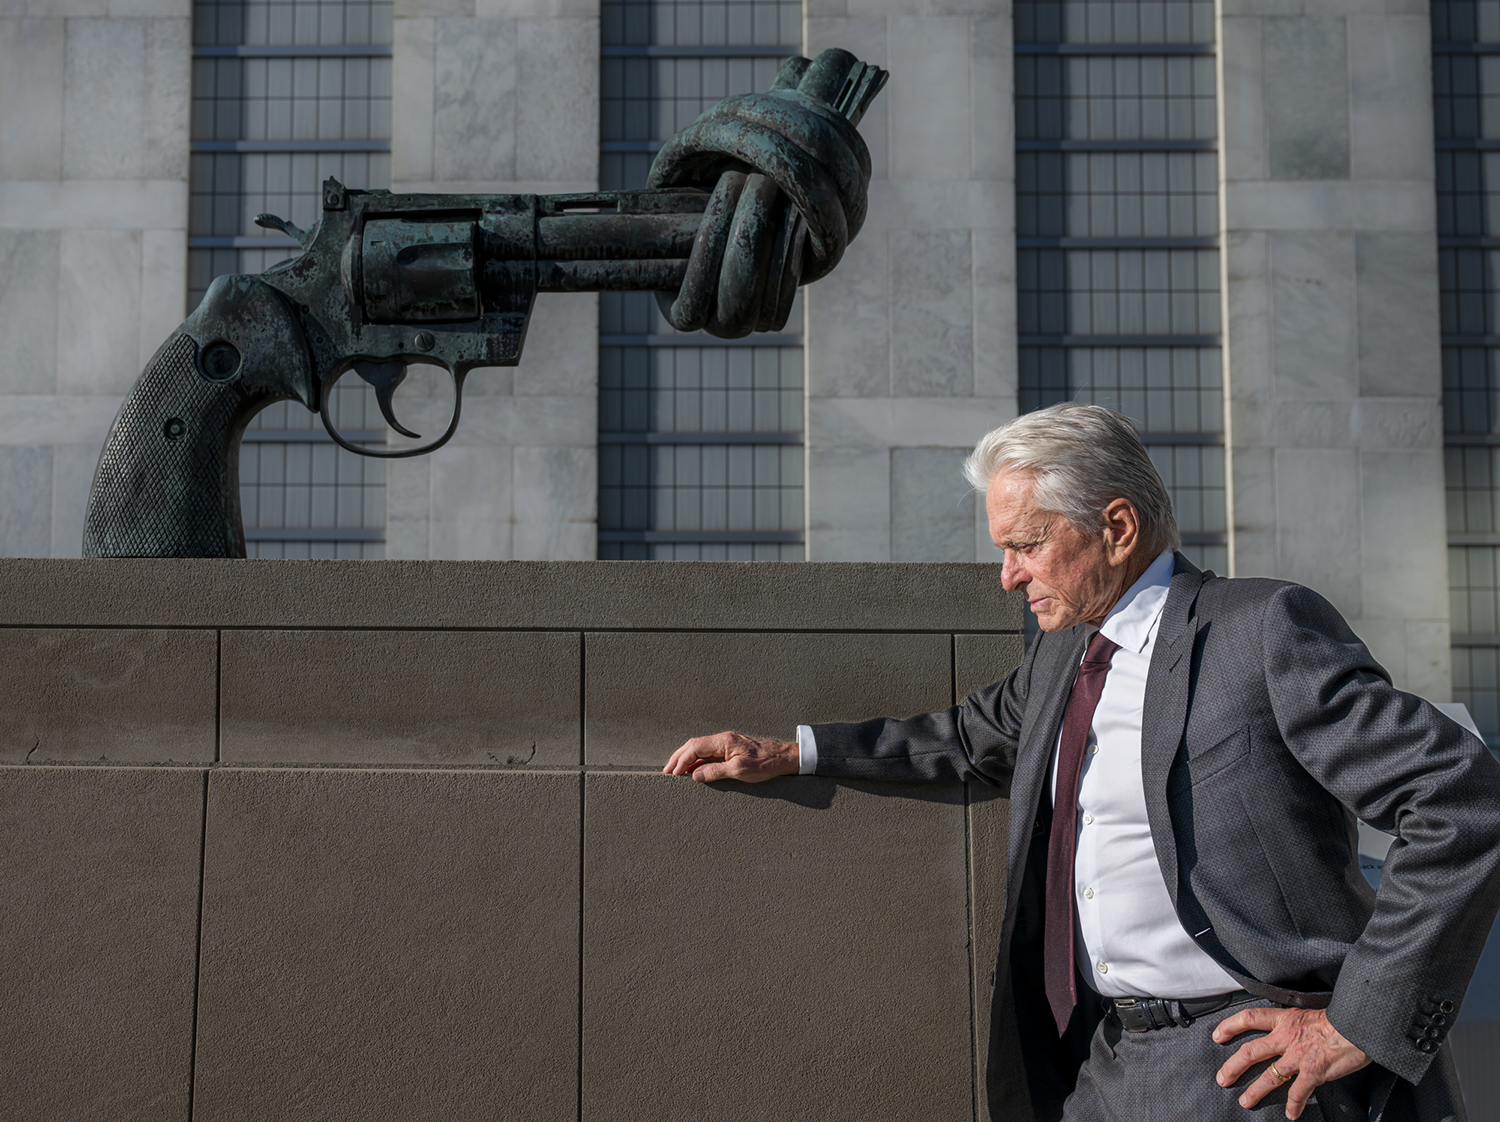 Michael Douglas, United Nations Messenger of Peace, stops by the “Non-Violence” sculpture during his visit to UN Headquarters to attend the International Day of Peace Youth Observance. 